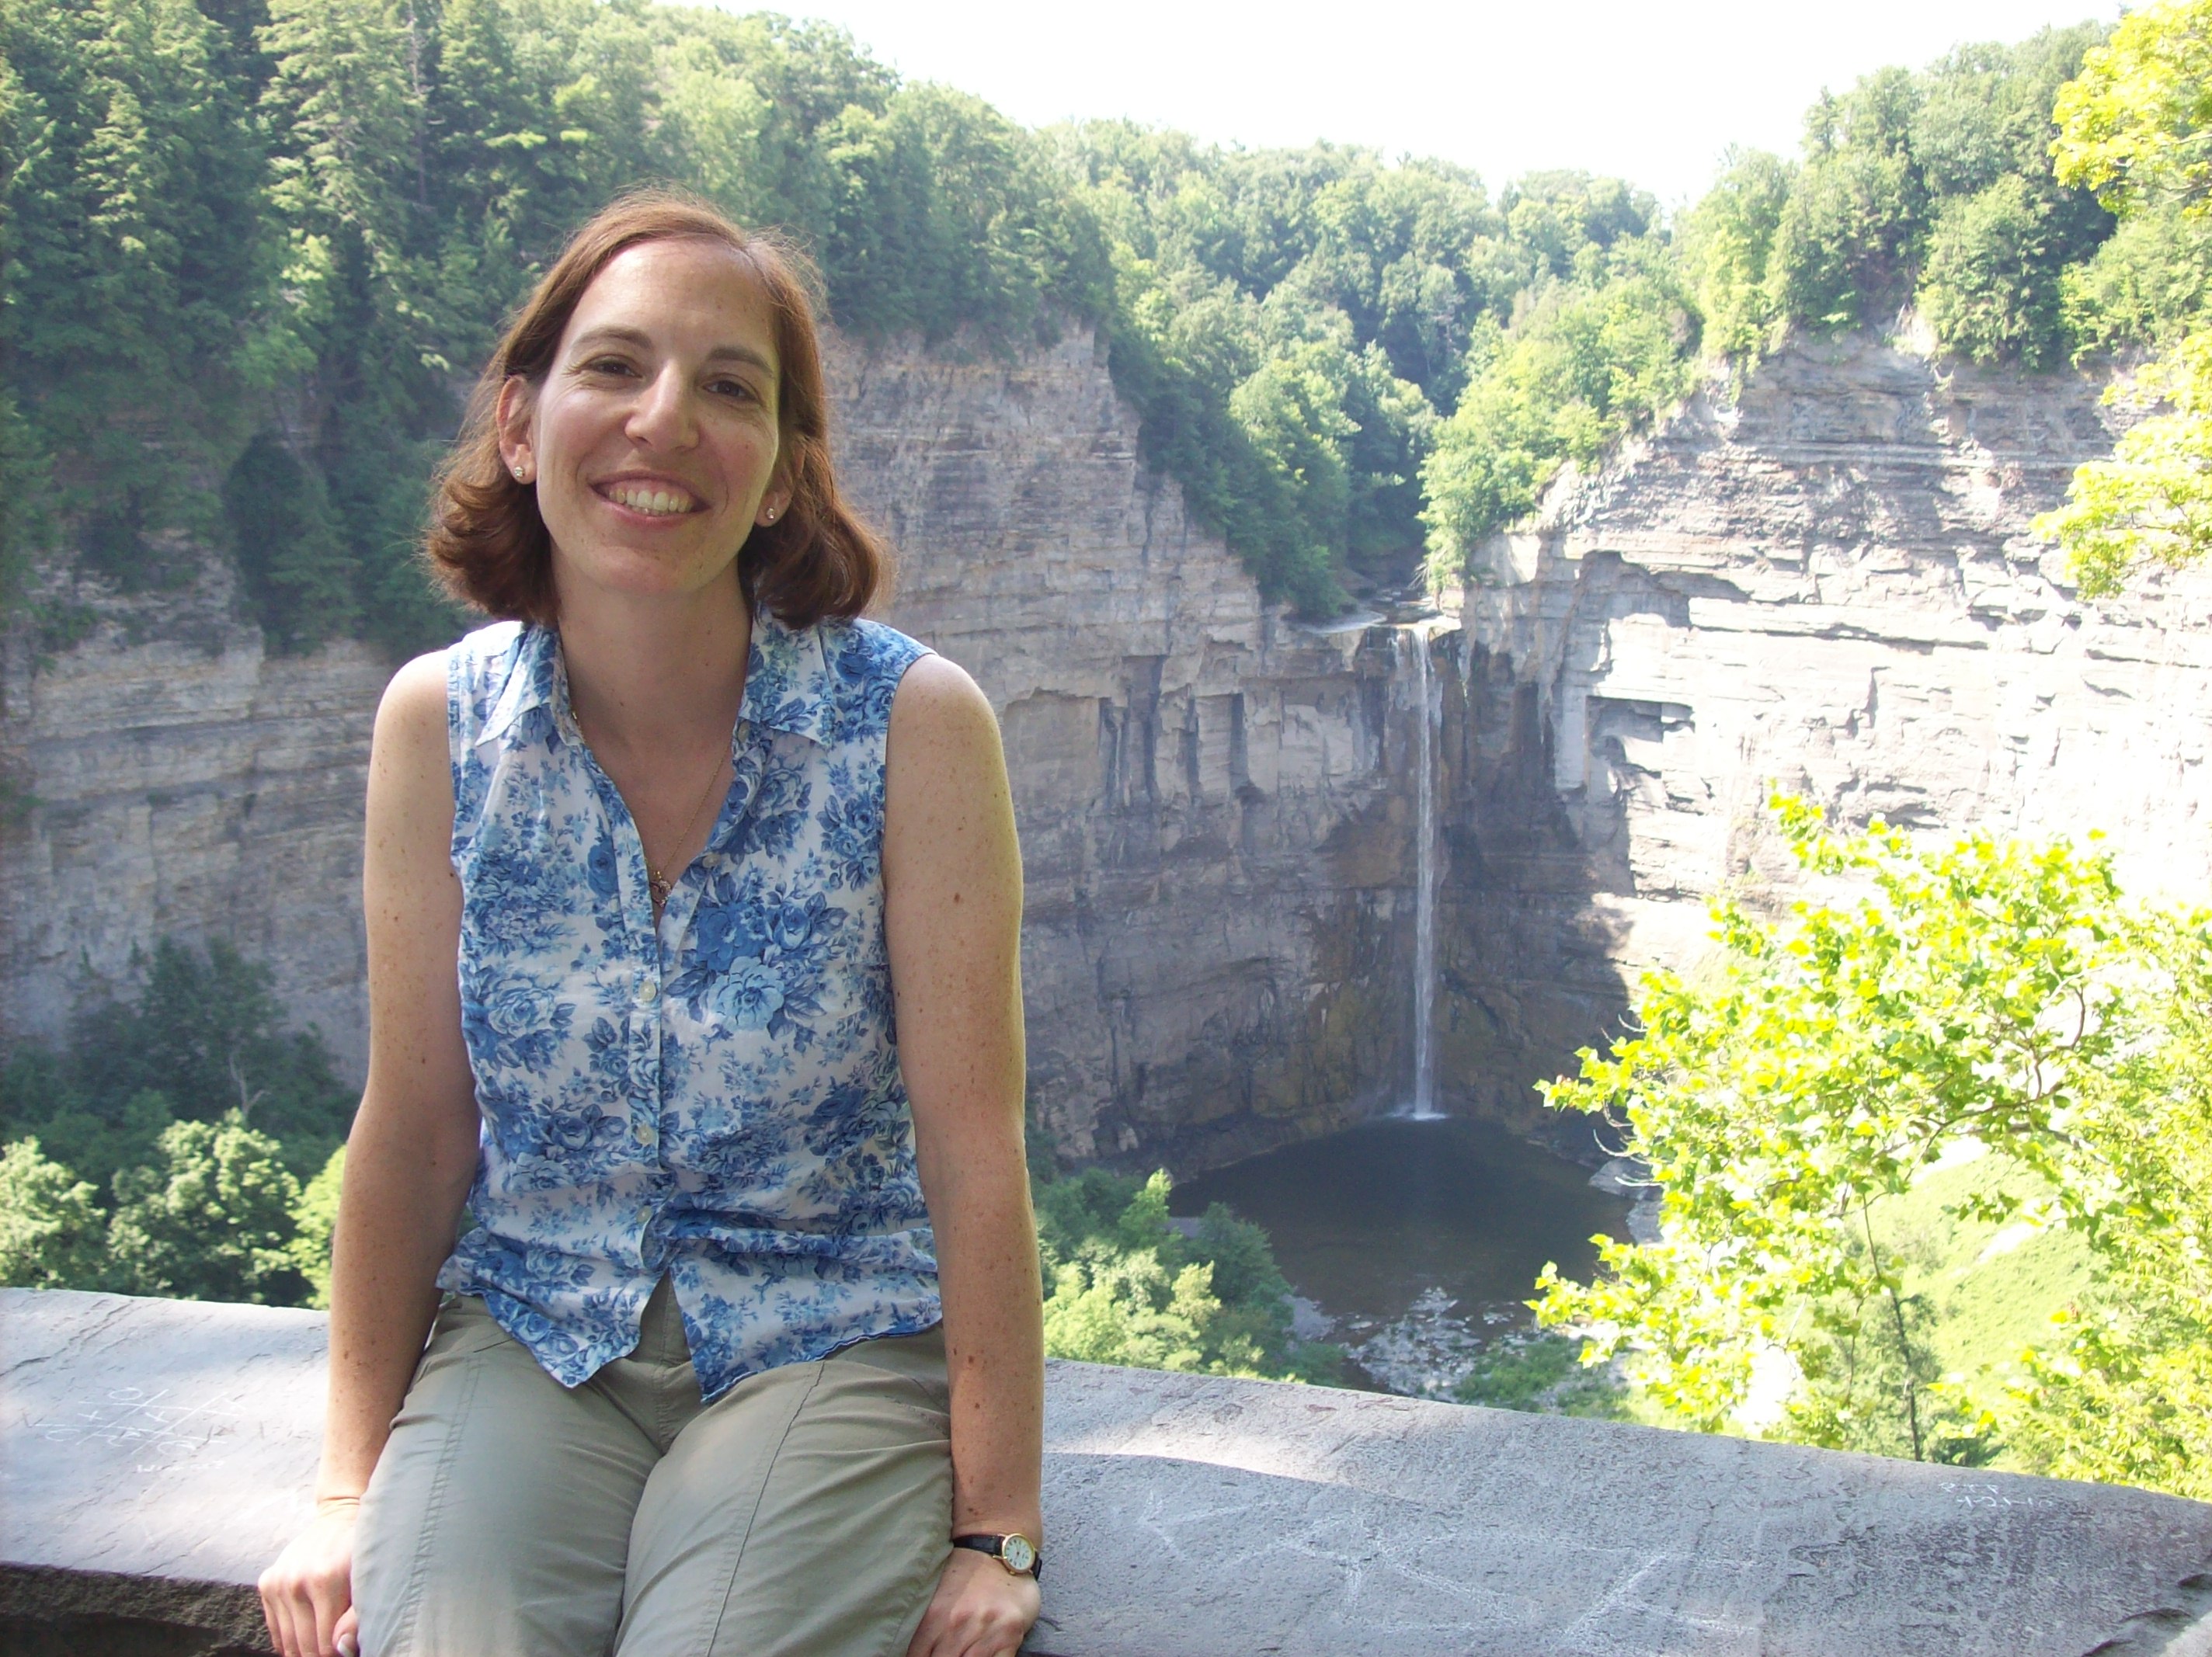 Erica J. Peters at Taughannock Falls in Ithaca, NY